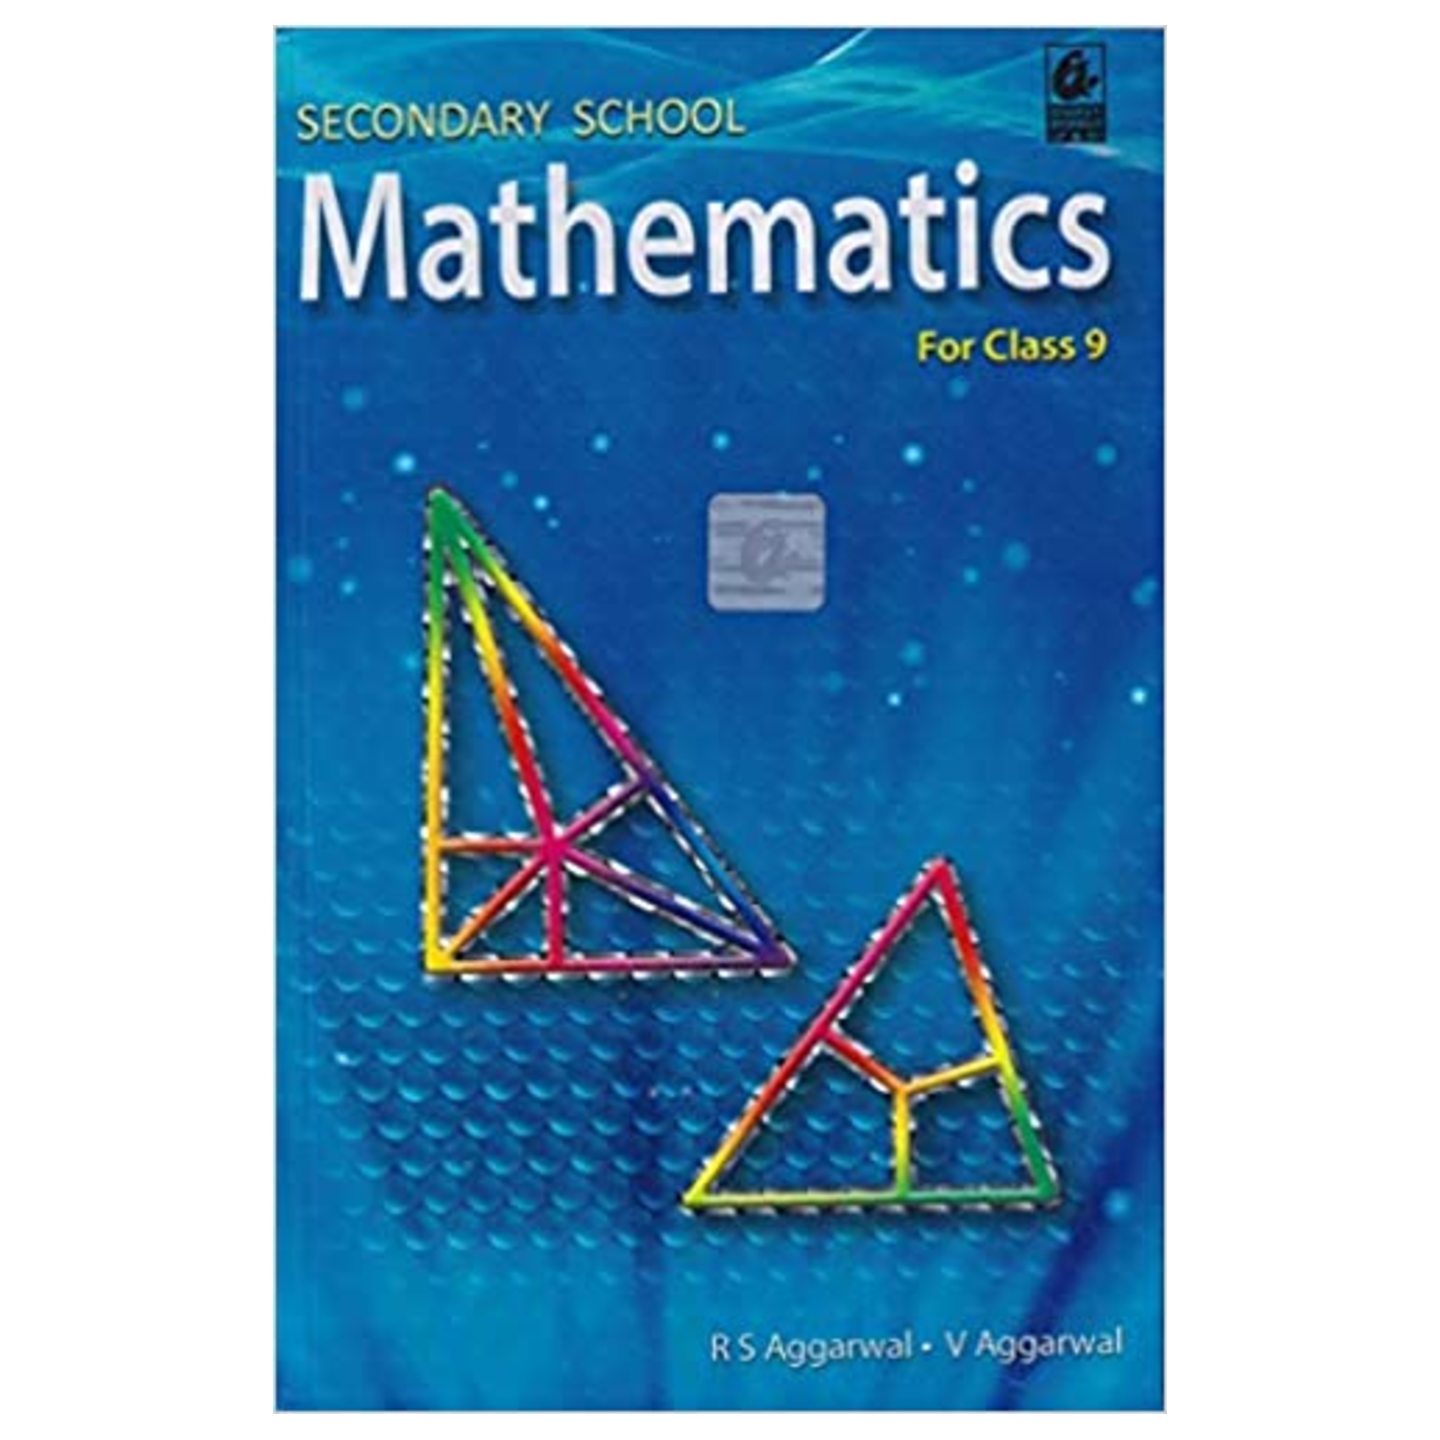 Secondary School Mathematics for Class 9 RS AGGARWAL